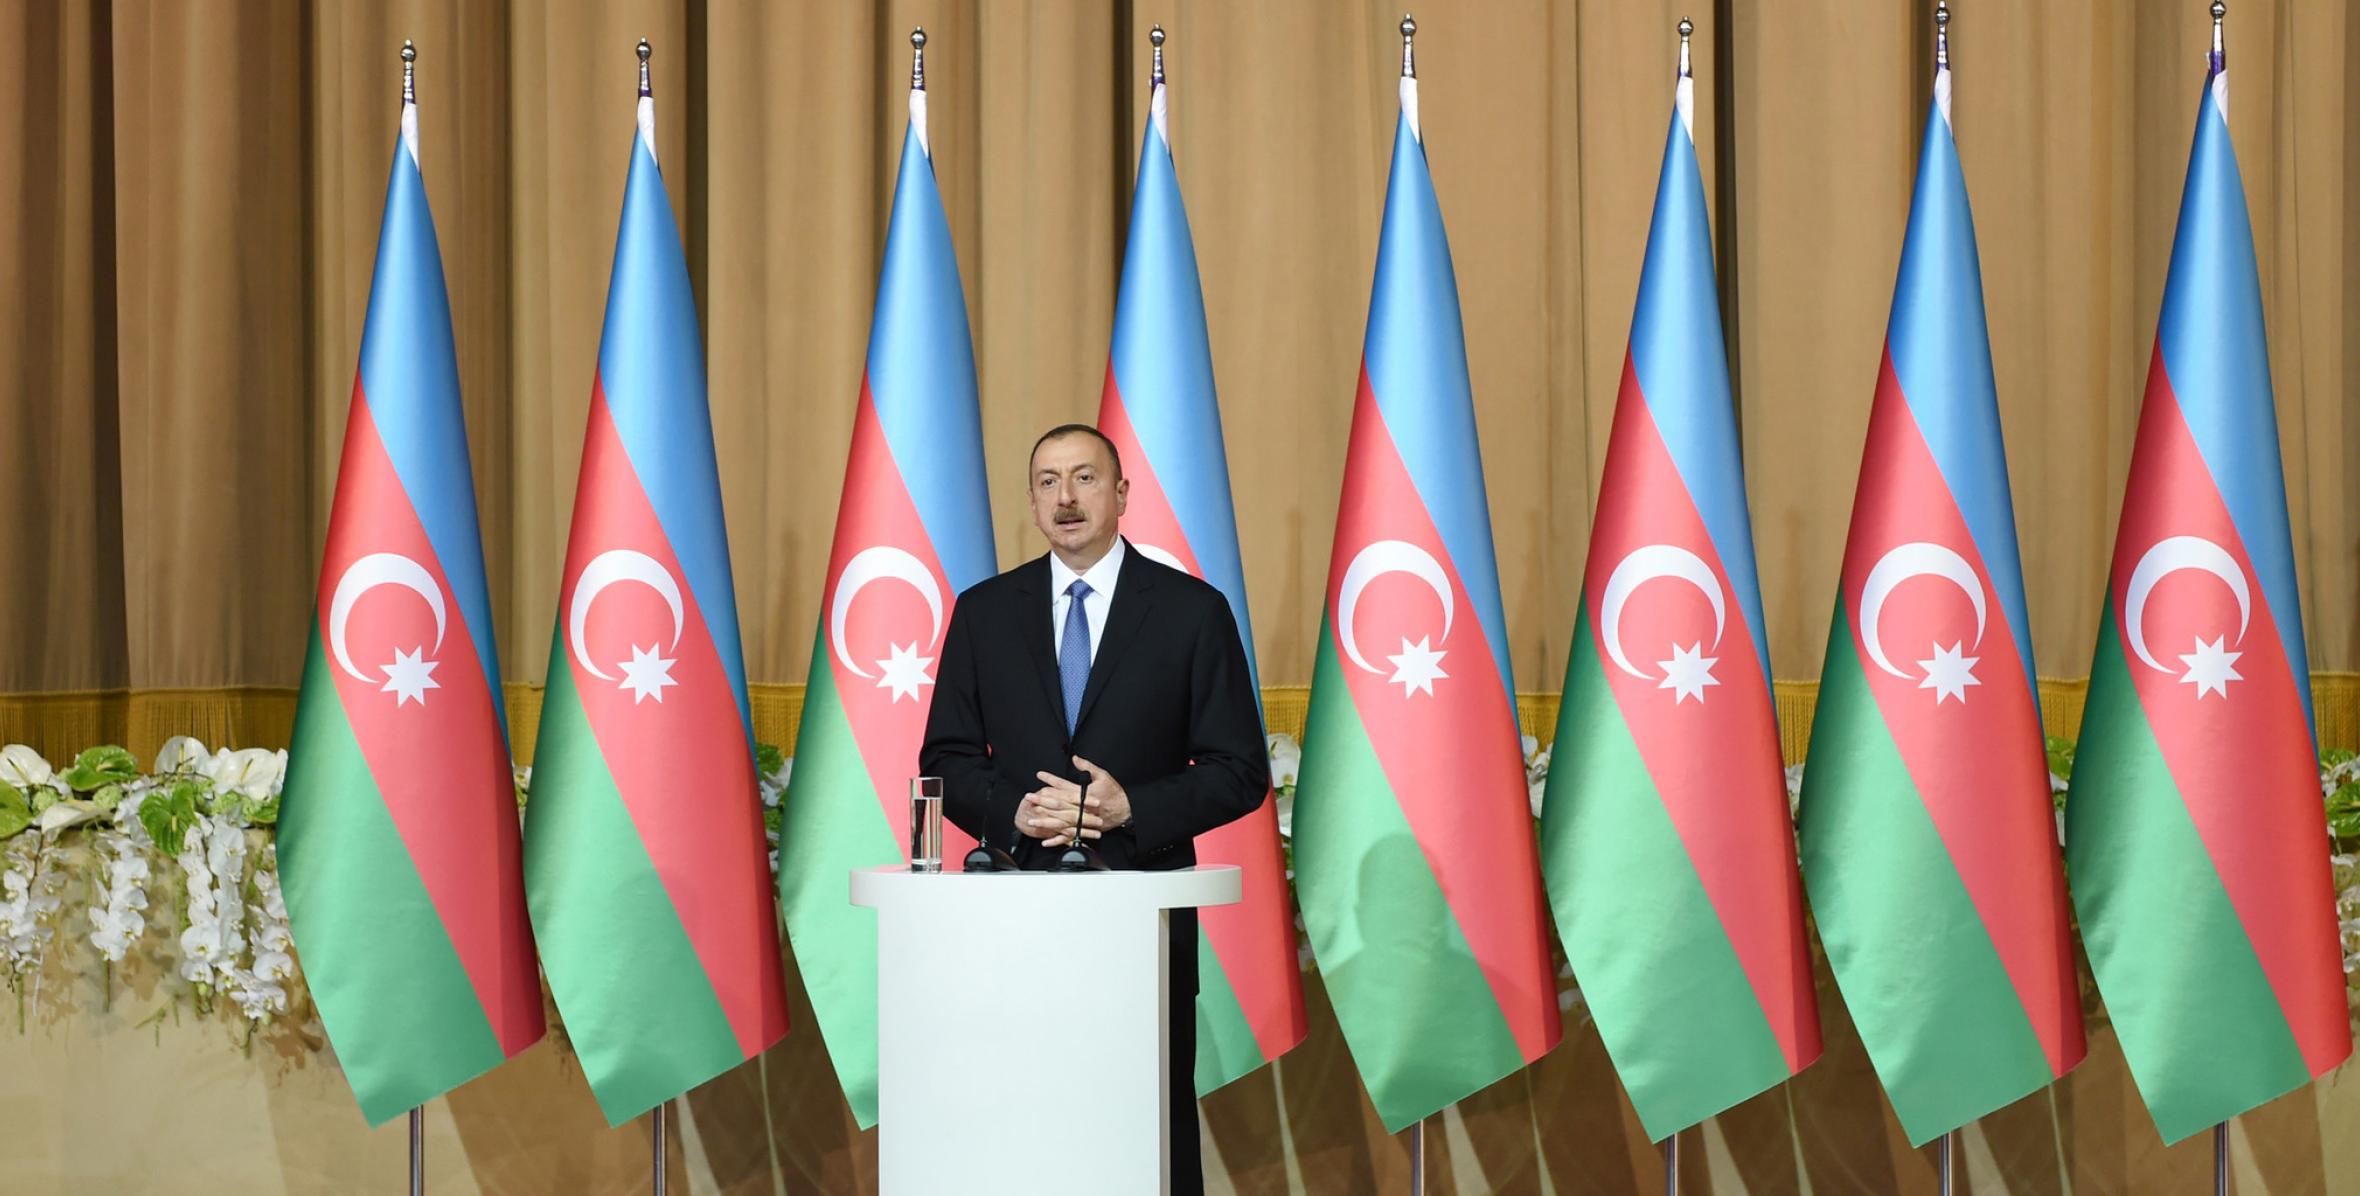 Speech by Ilham Aliyev at the official reception on the occasion of the Republic Day